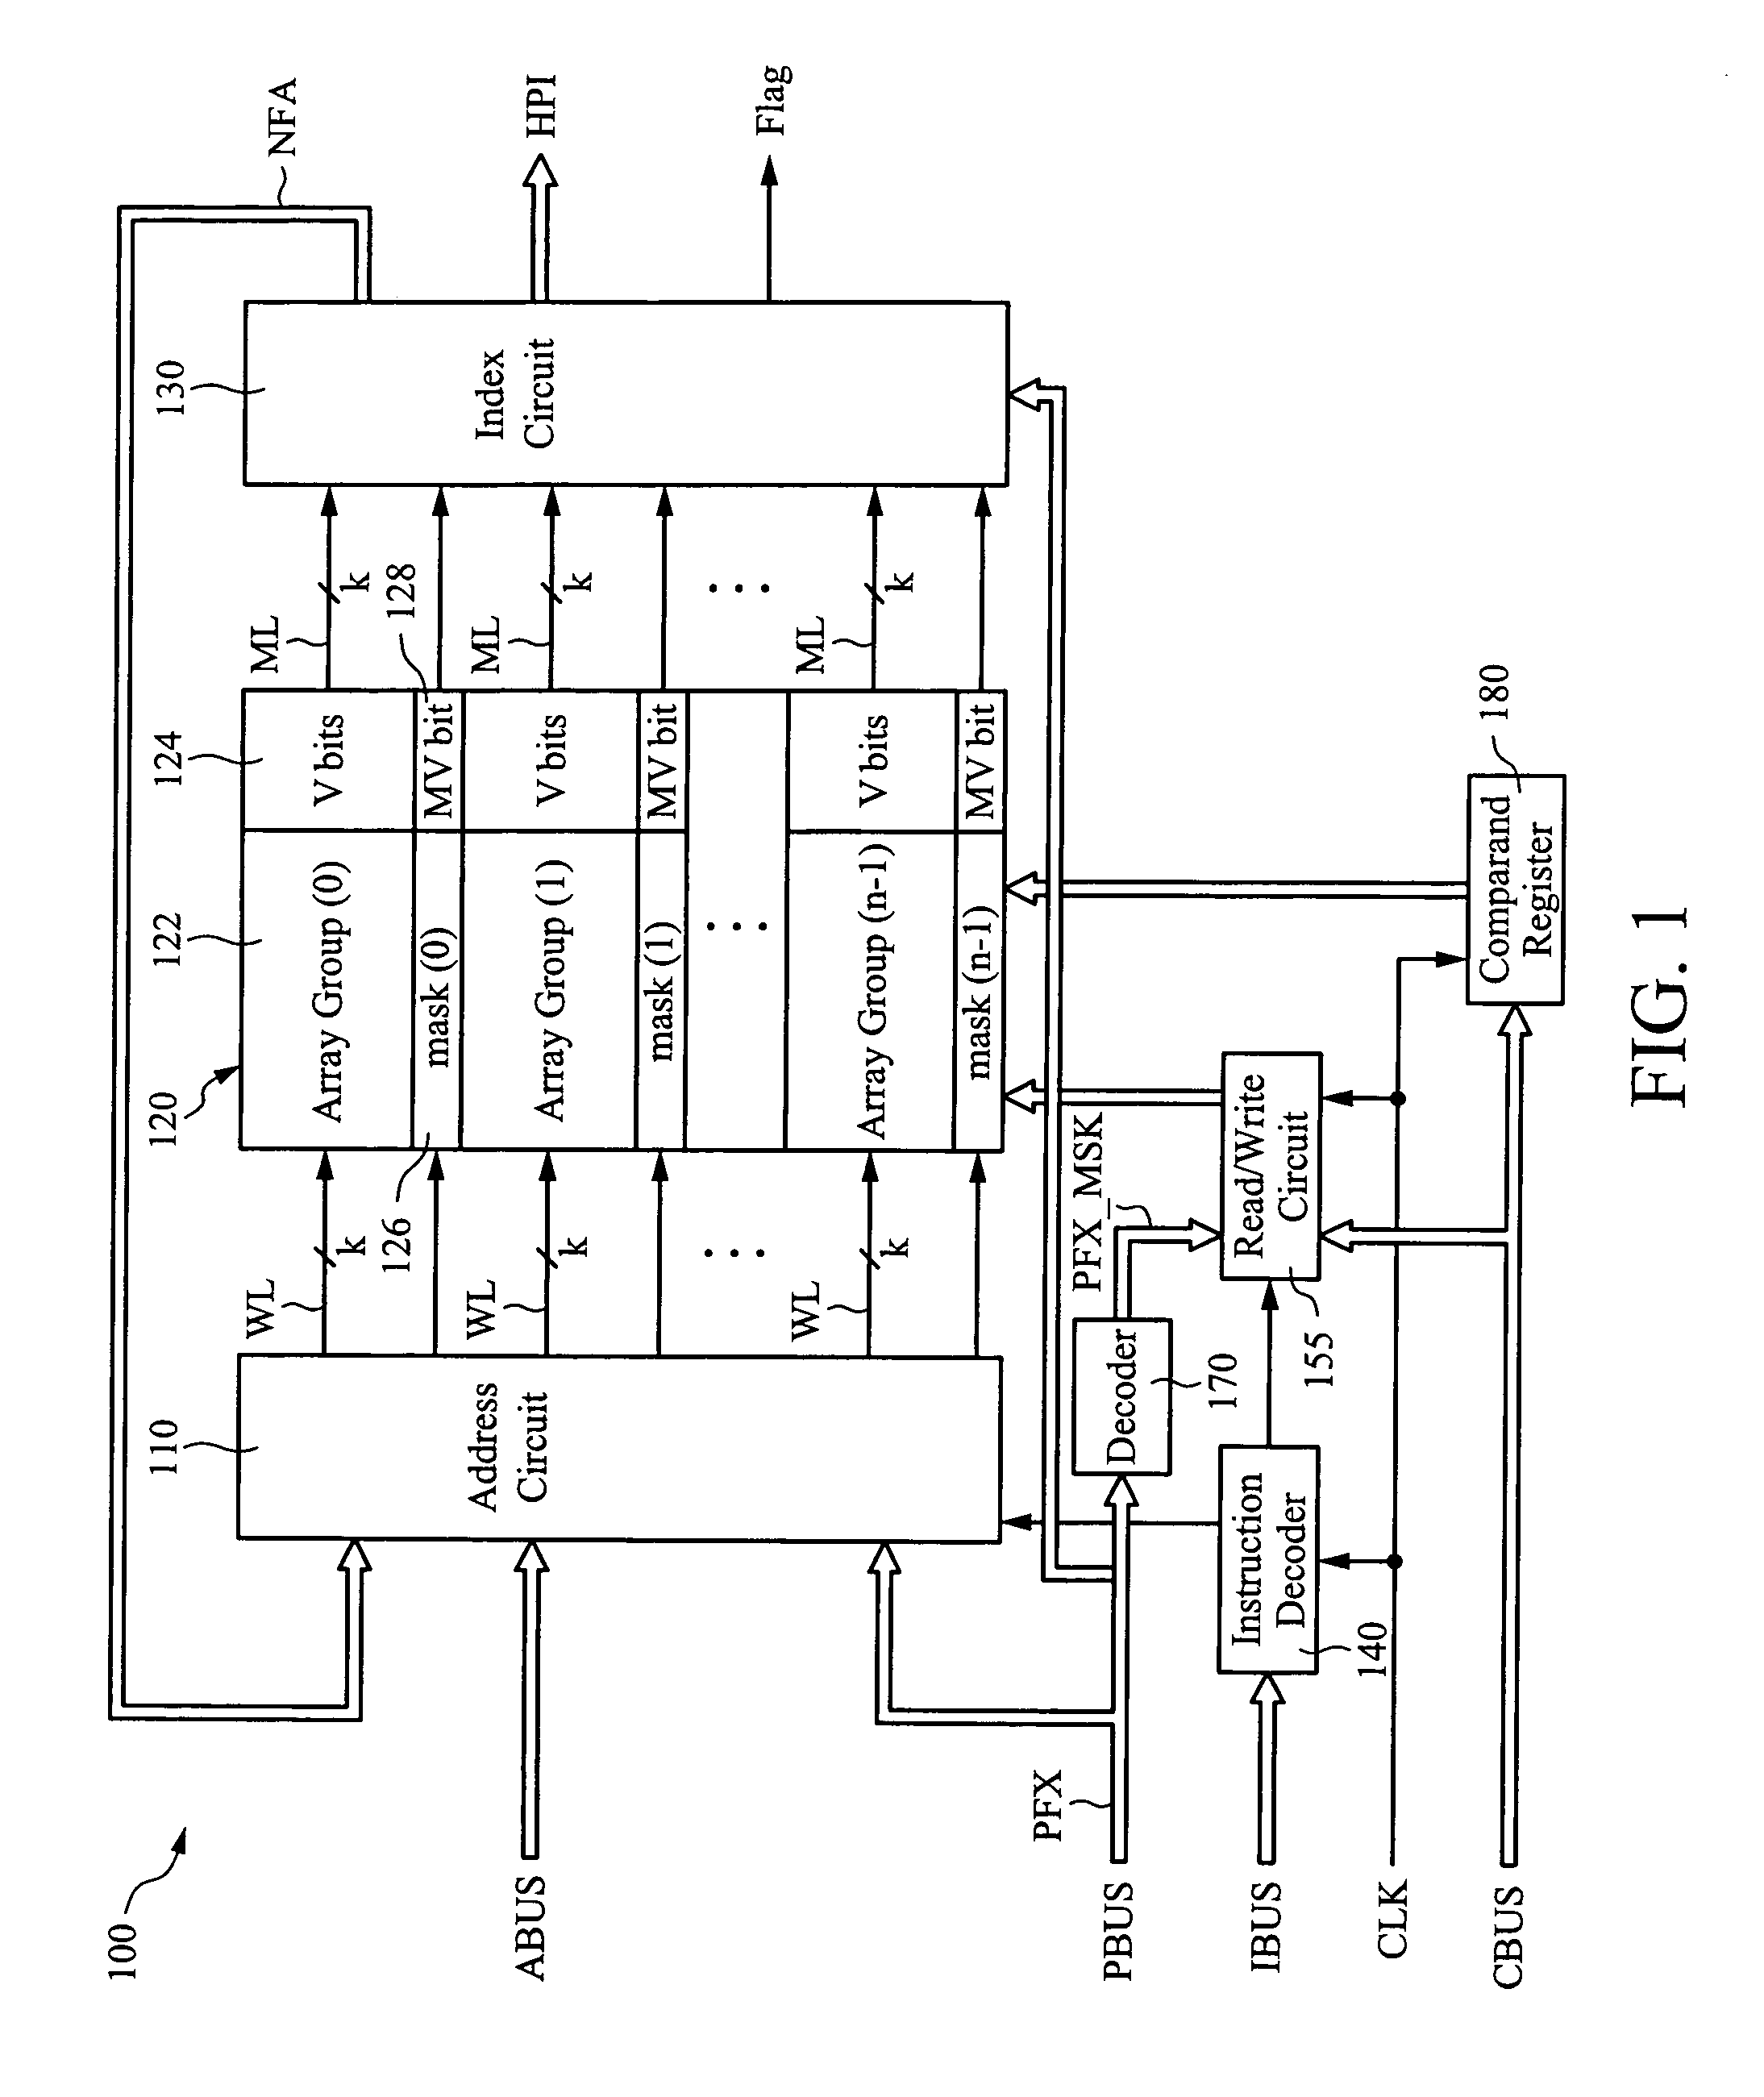 Ternary content addressable memory device